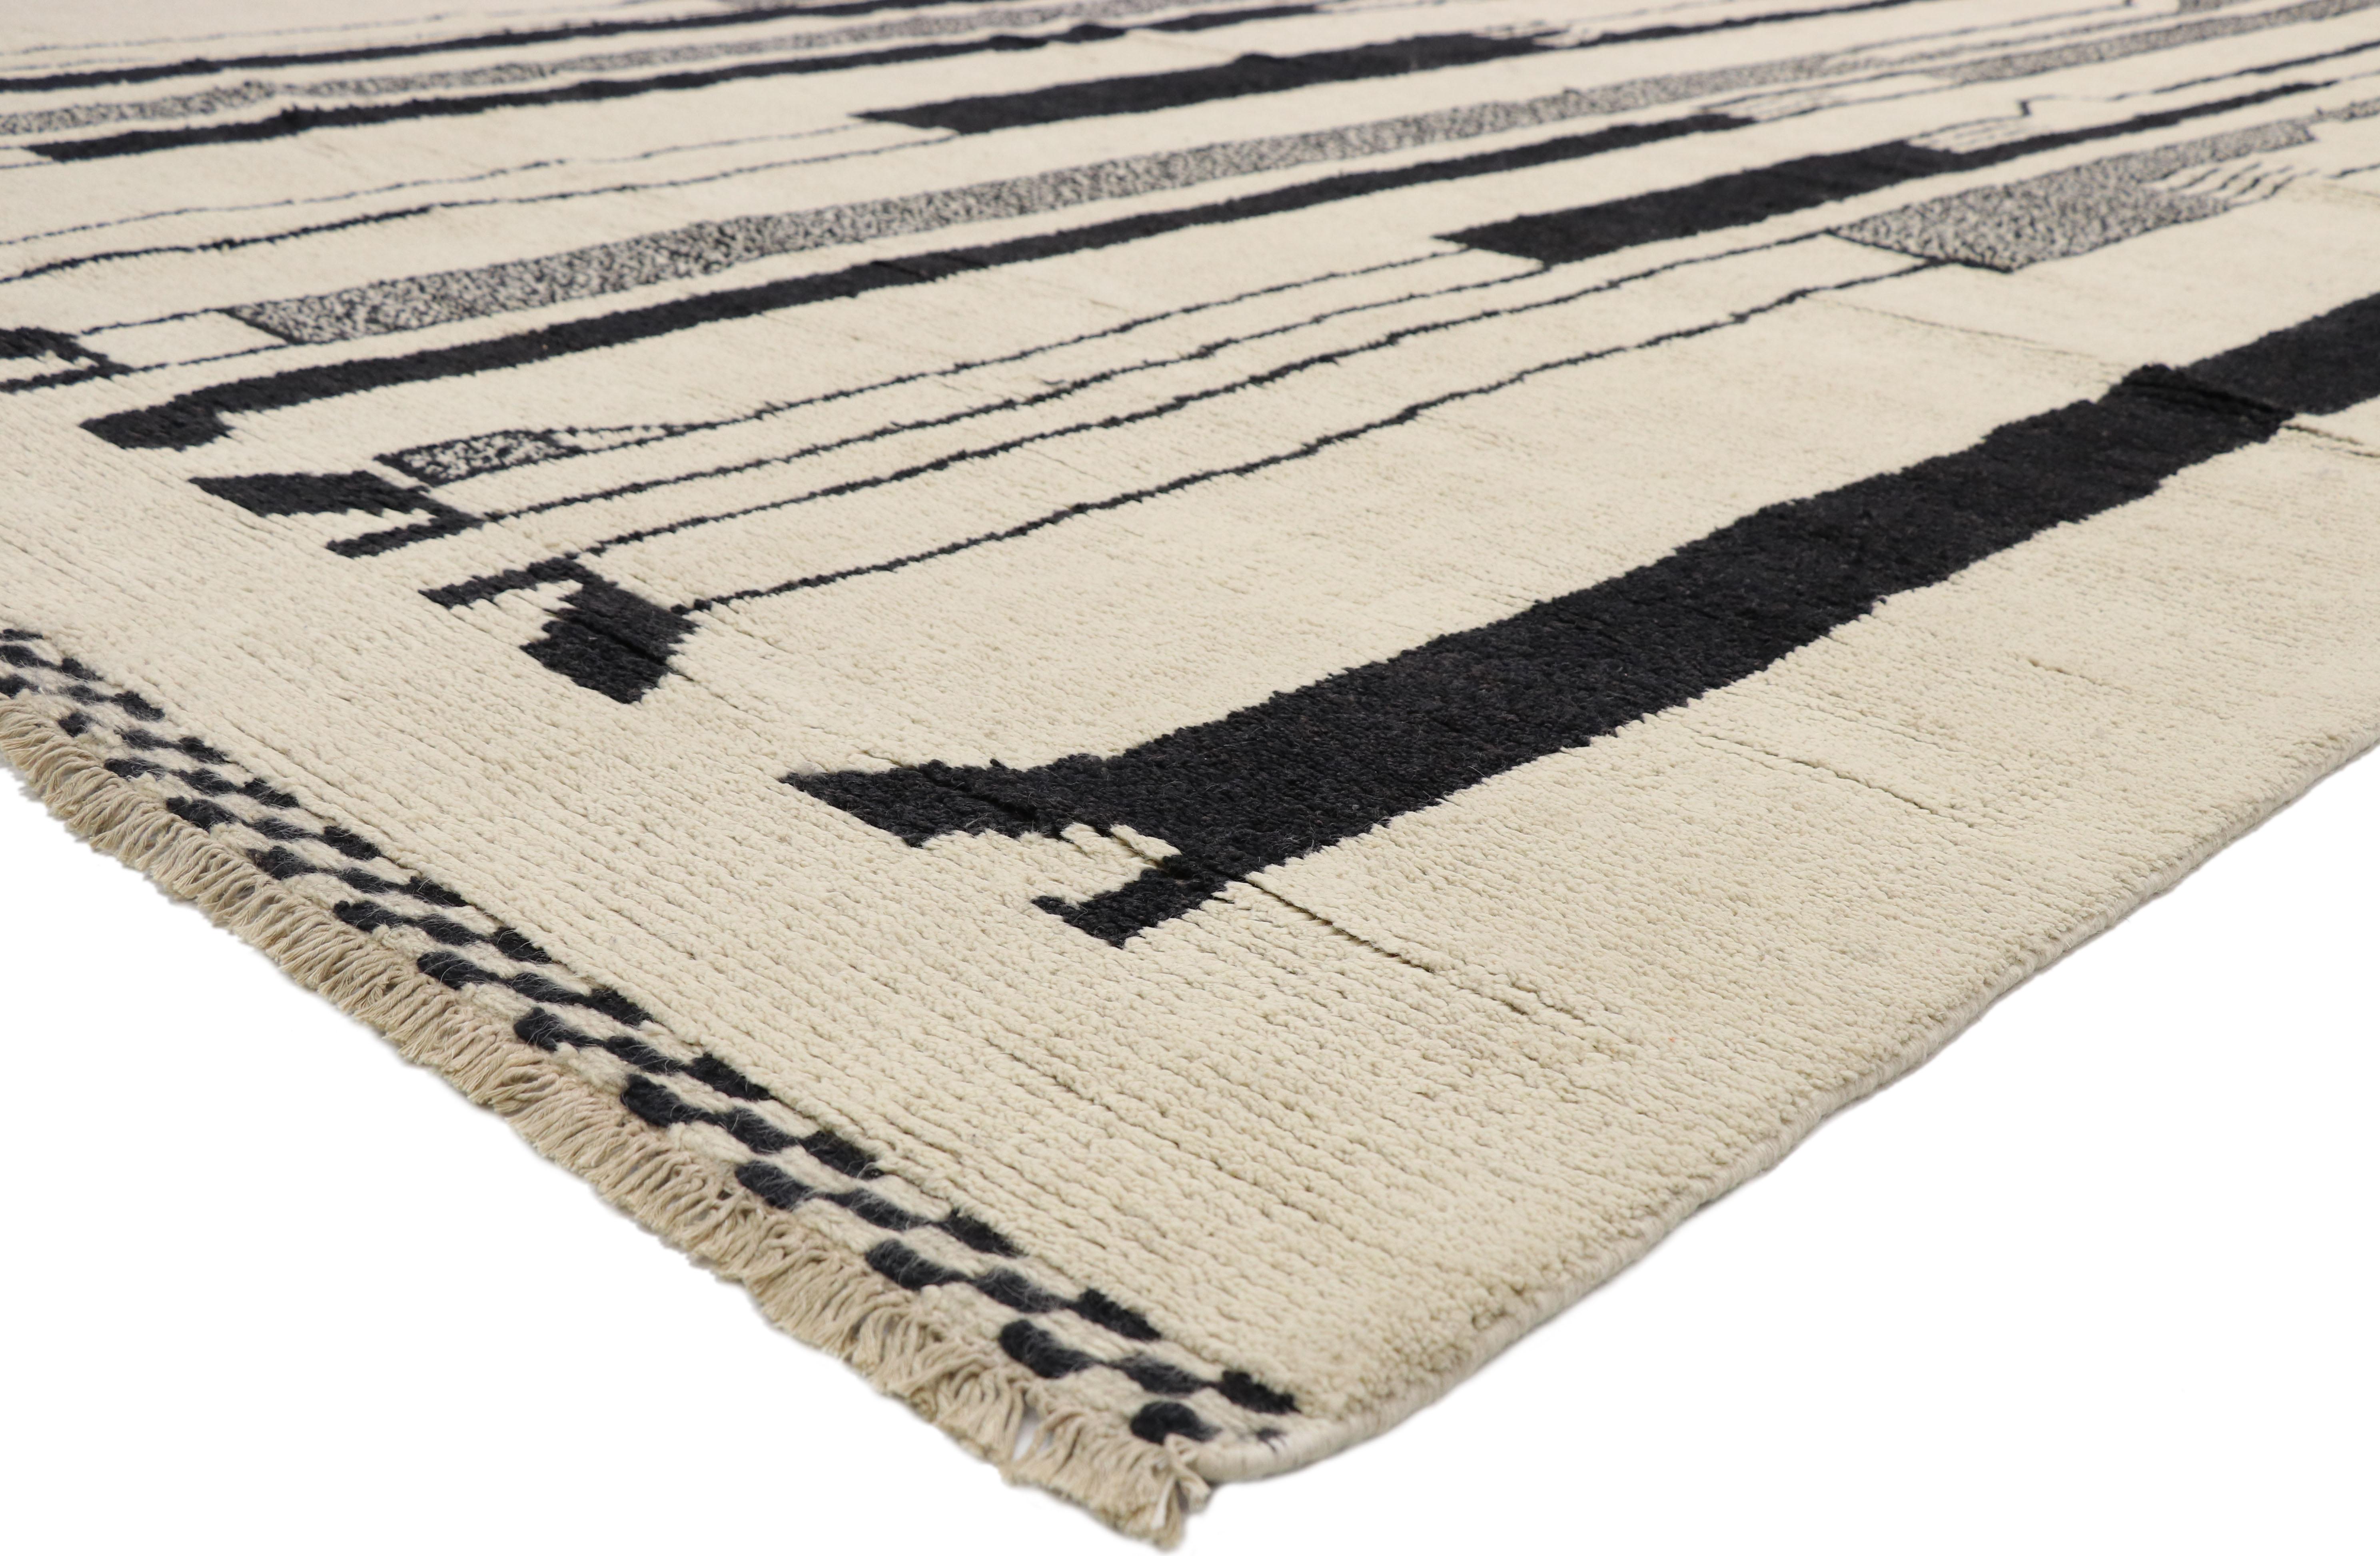 80531, new contemporary Moroccan rug Inspired by Alberto Giacometti Dogon Tribe. This hand knotted wool contemporary Moroccan rug features elongated silhouettes in a black-scale palette against a solid creamy-beige backdrop. With cool Jazz Age style